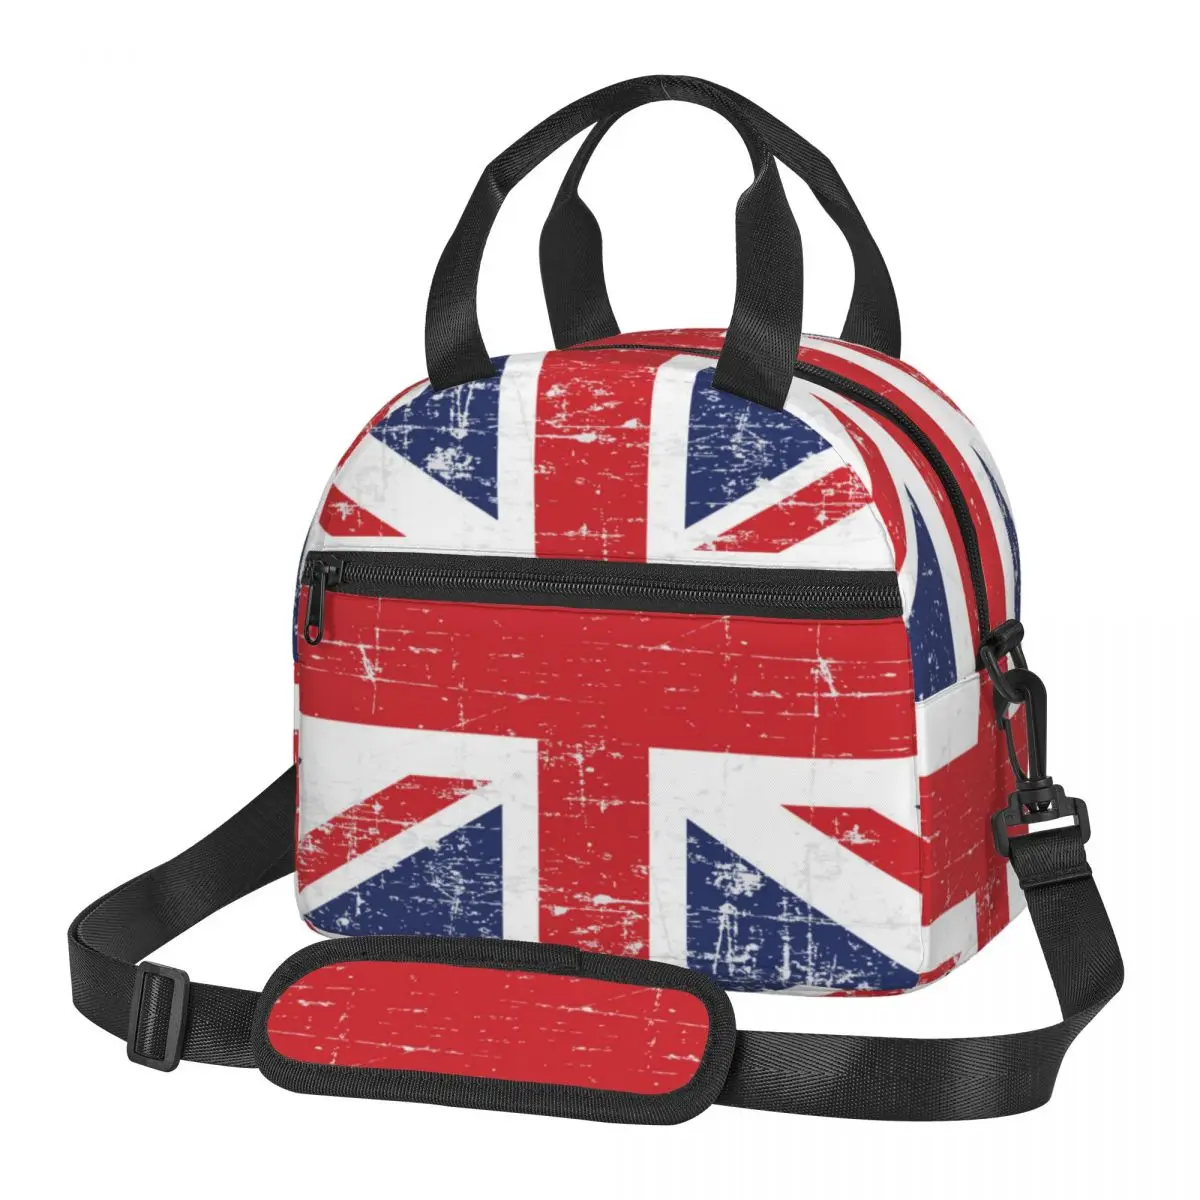 Portable Insulated Thermal Bento Lunch Box Union Jack British Flag Picnic Storage Bag Pouch Lunch Bag